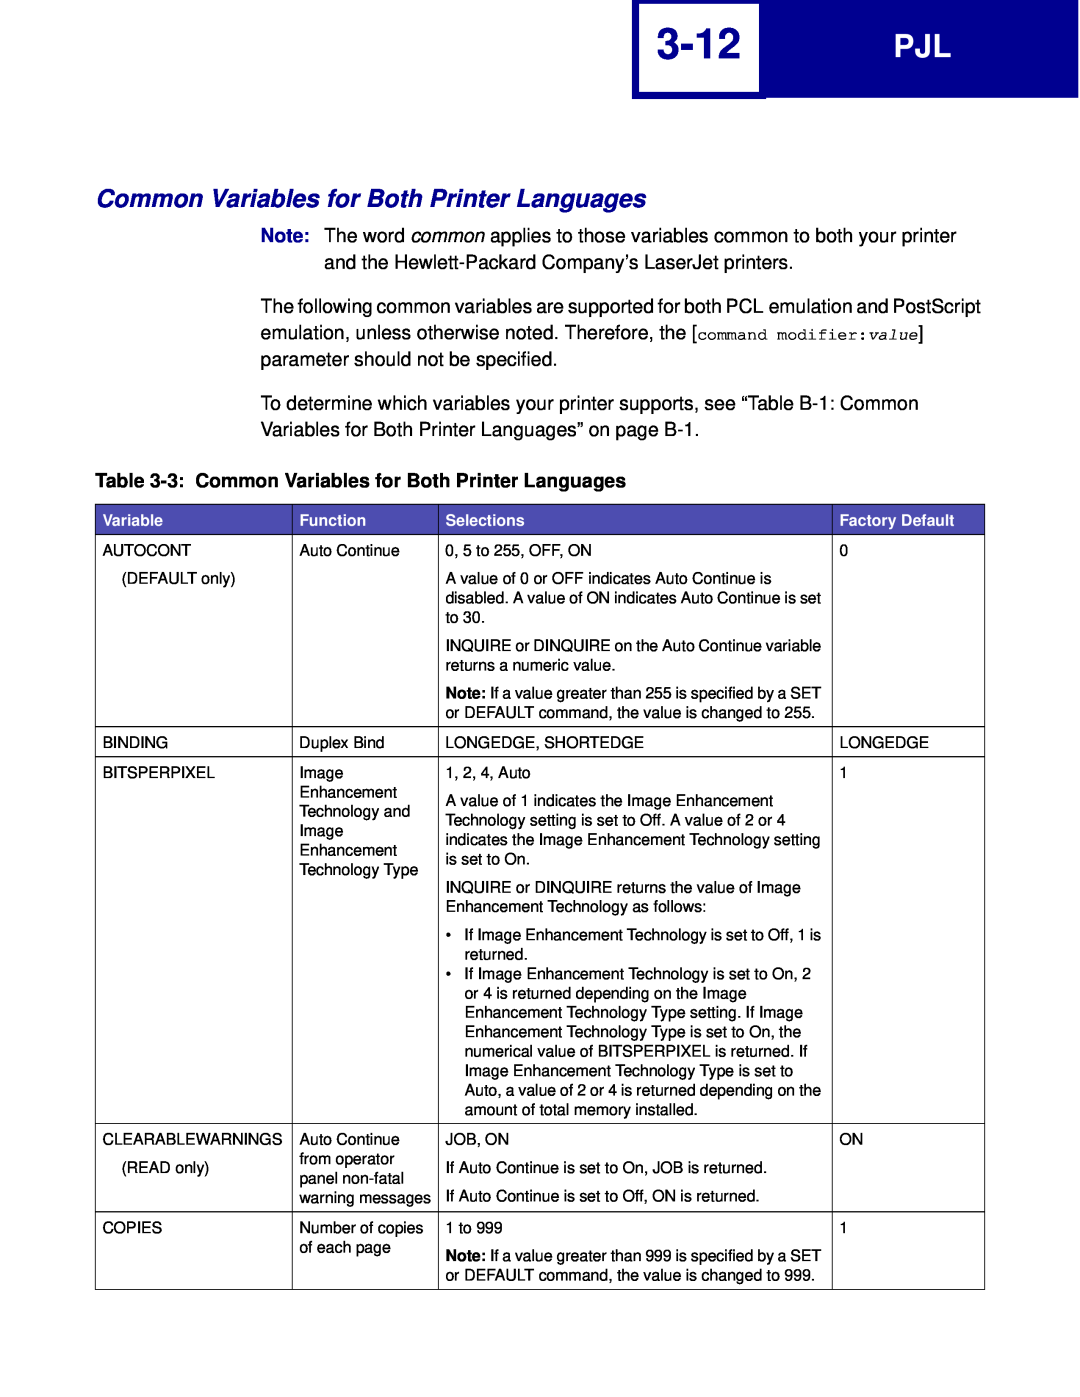 Lexmark C762, C760 manual 3-12, 3 Common Variables for Both Printer Languages 